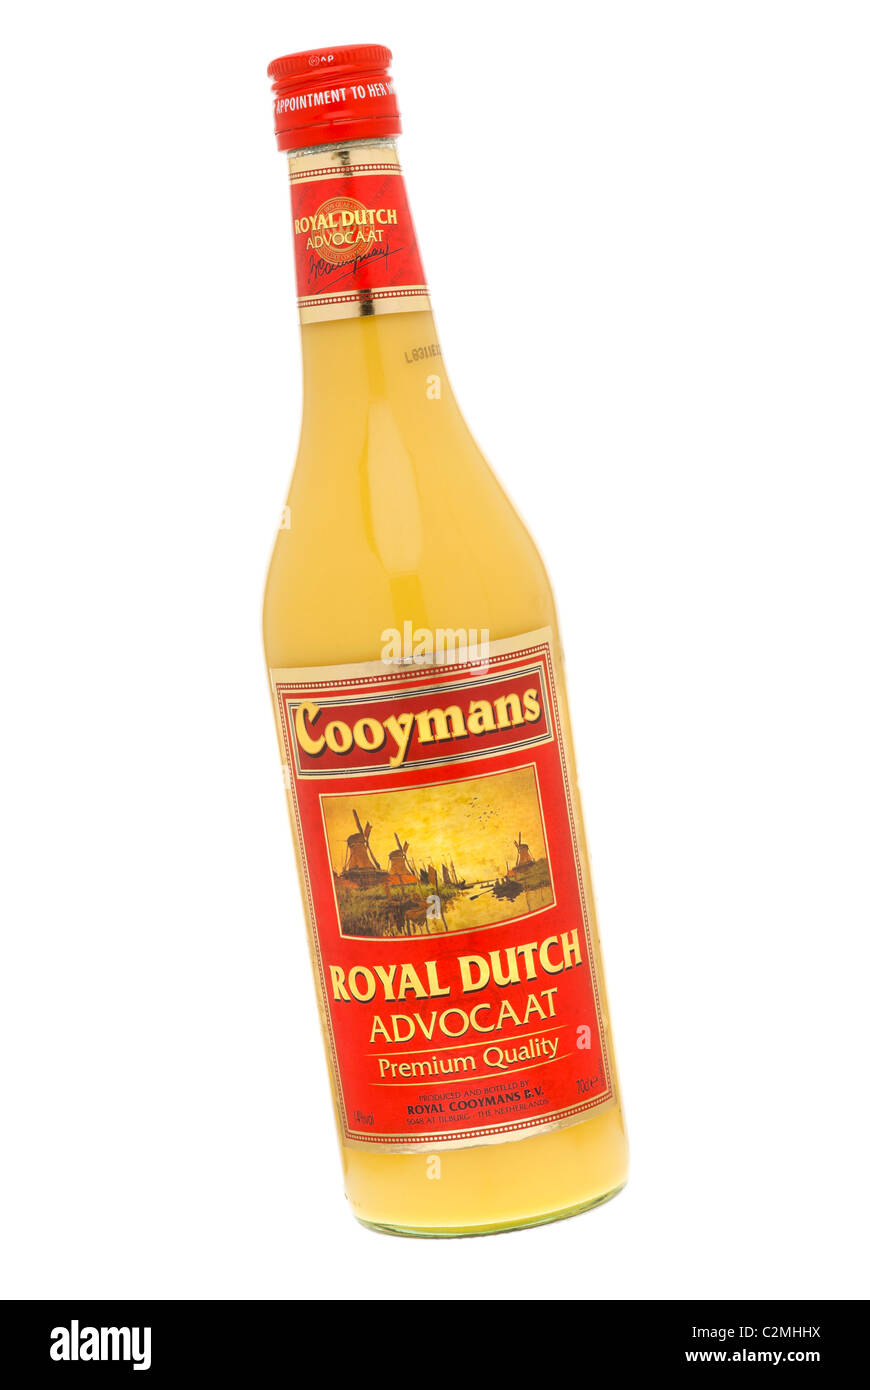 "Cooymans" Advocaat Liquor Drink Single Vintage Playing Card 